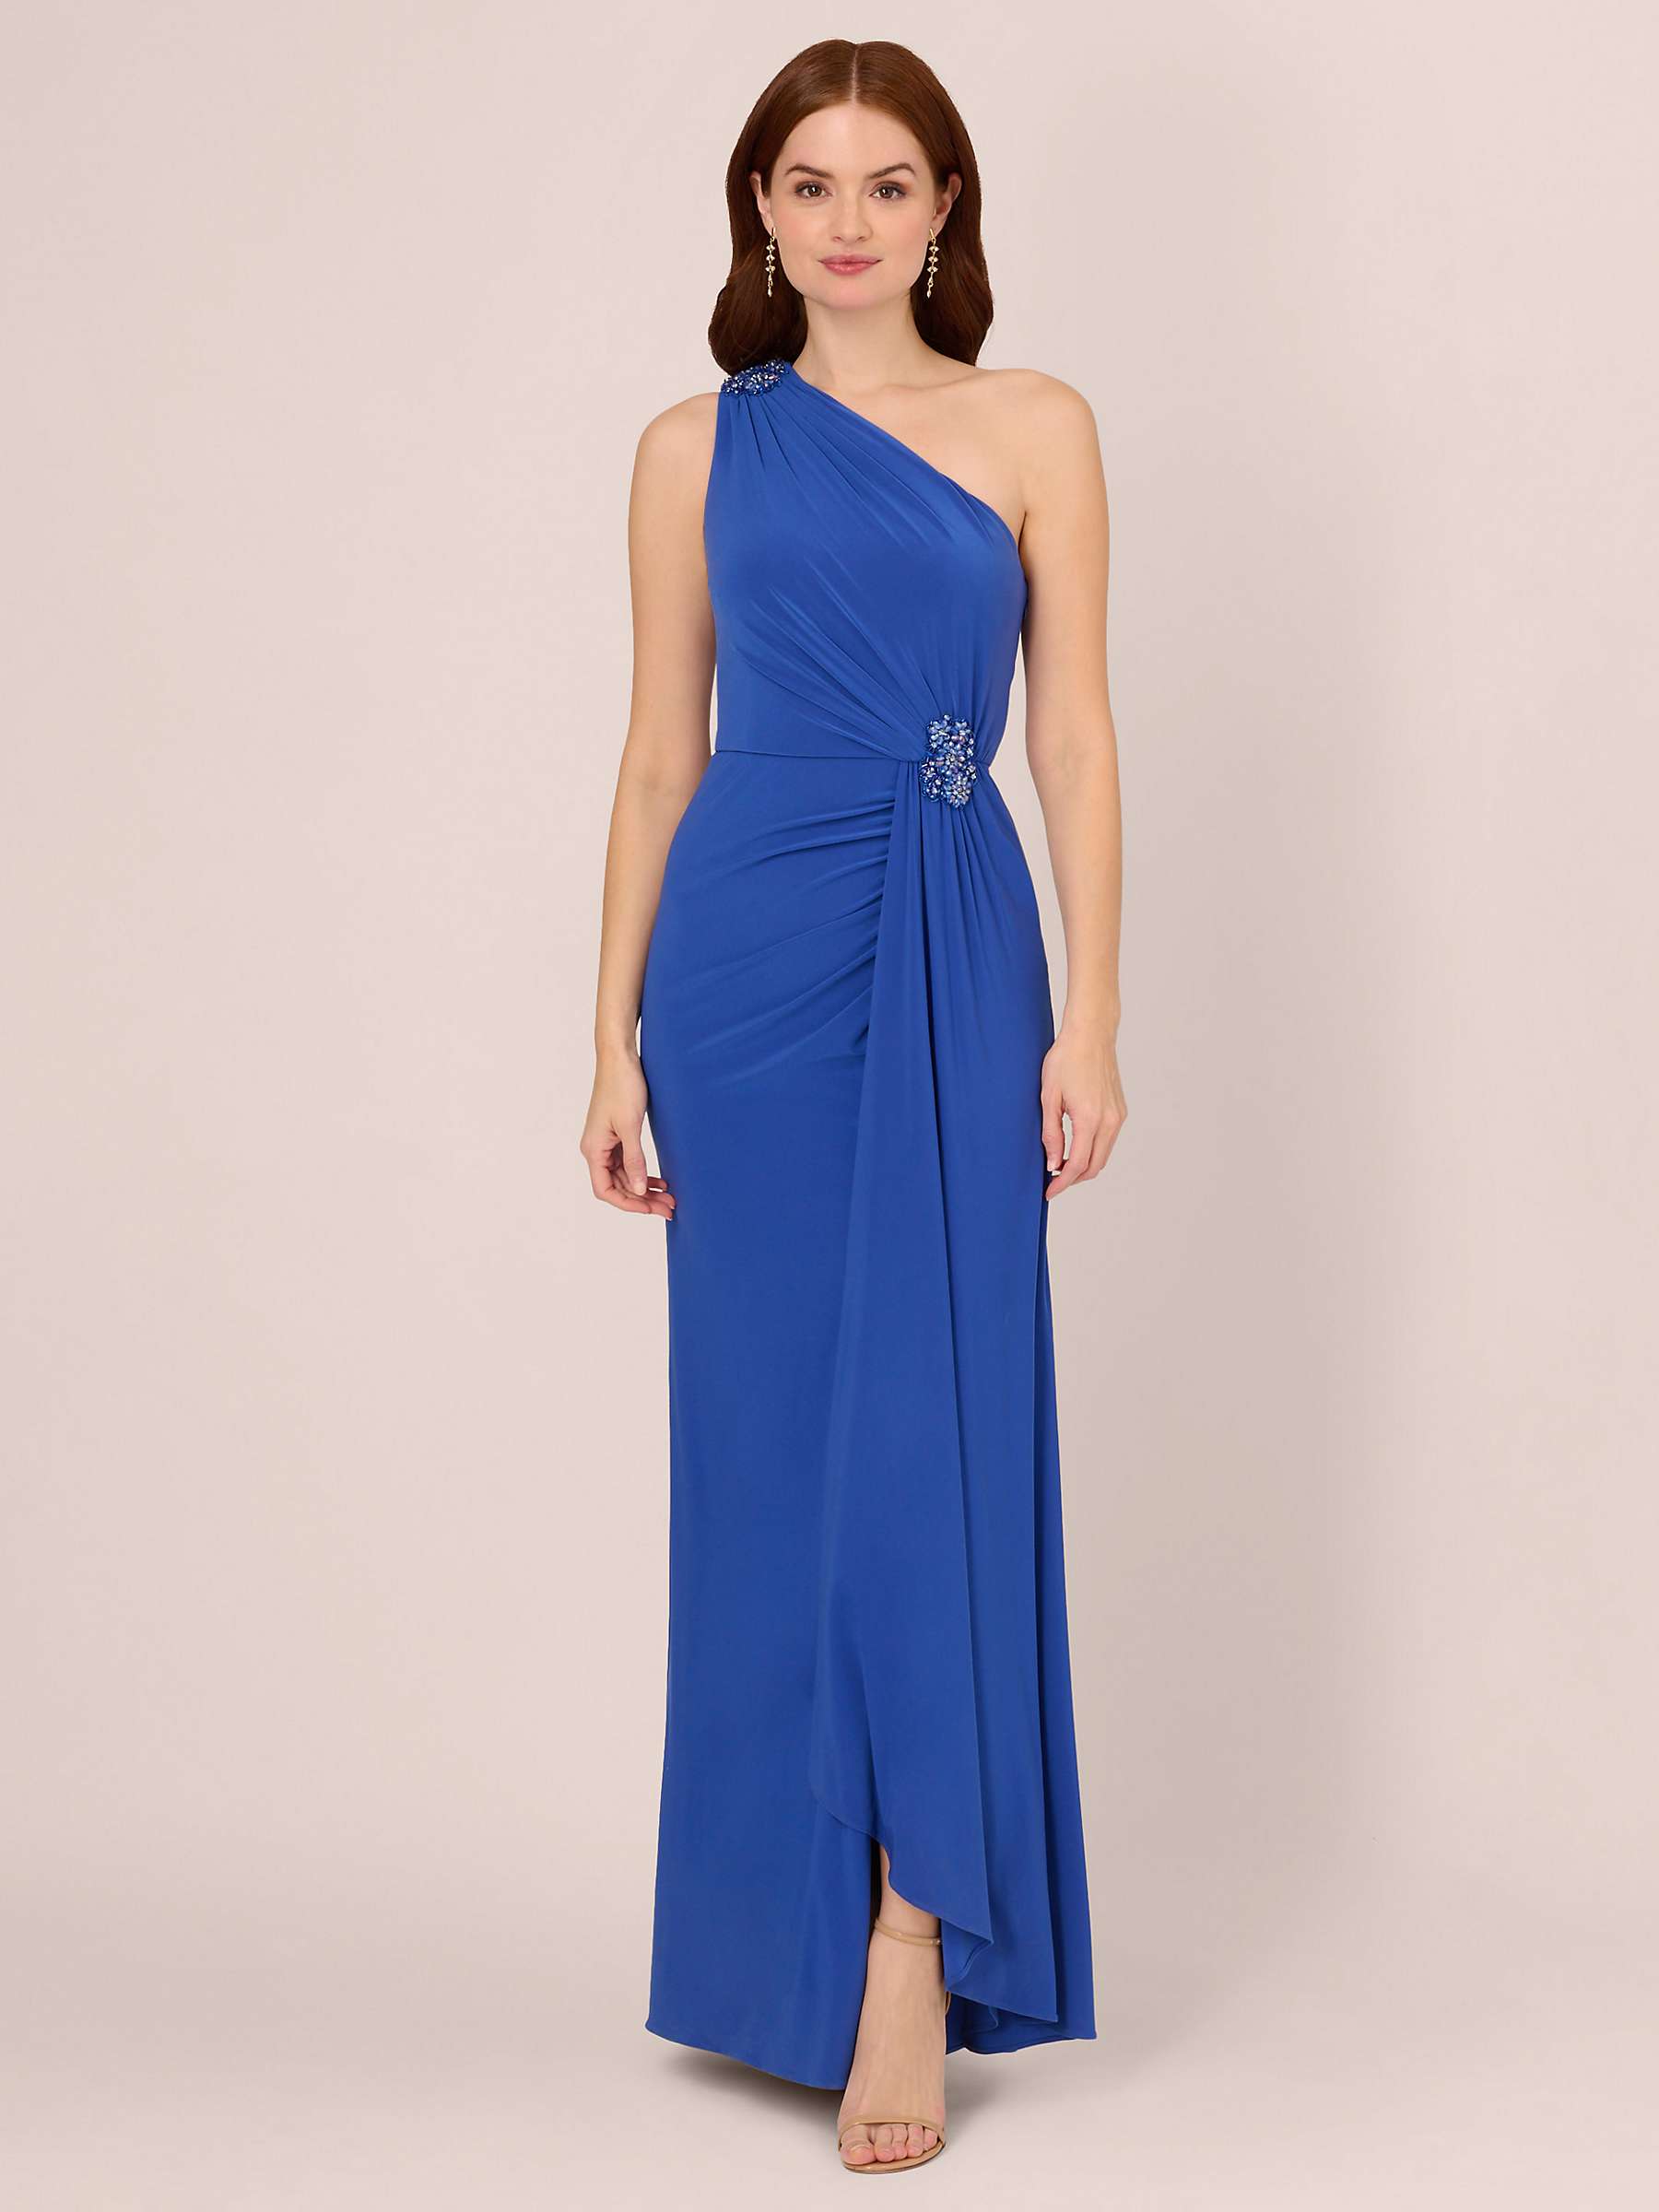 Buy Adrianna Papell One Shoulder Embellished Jersey Maxi Dress, Brilliant Sapphire Online at johnlewis.com